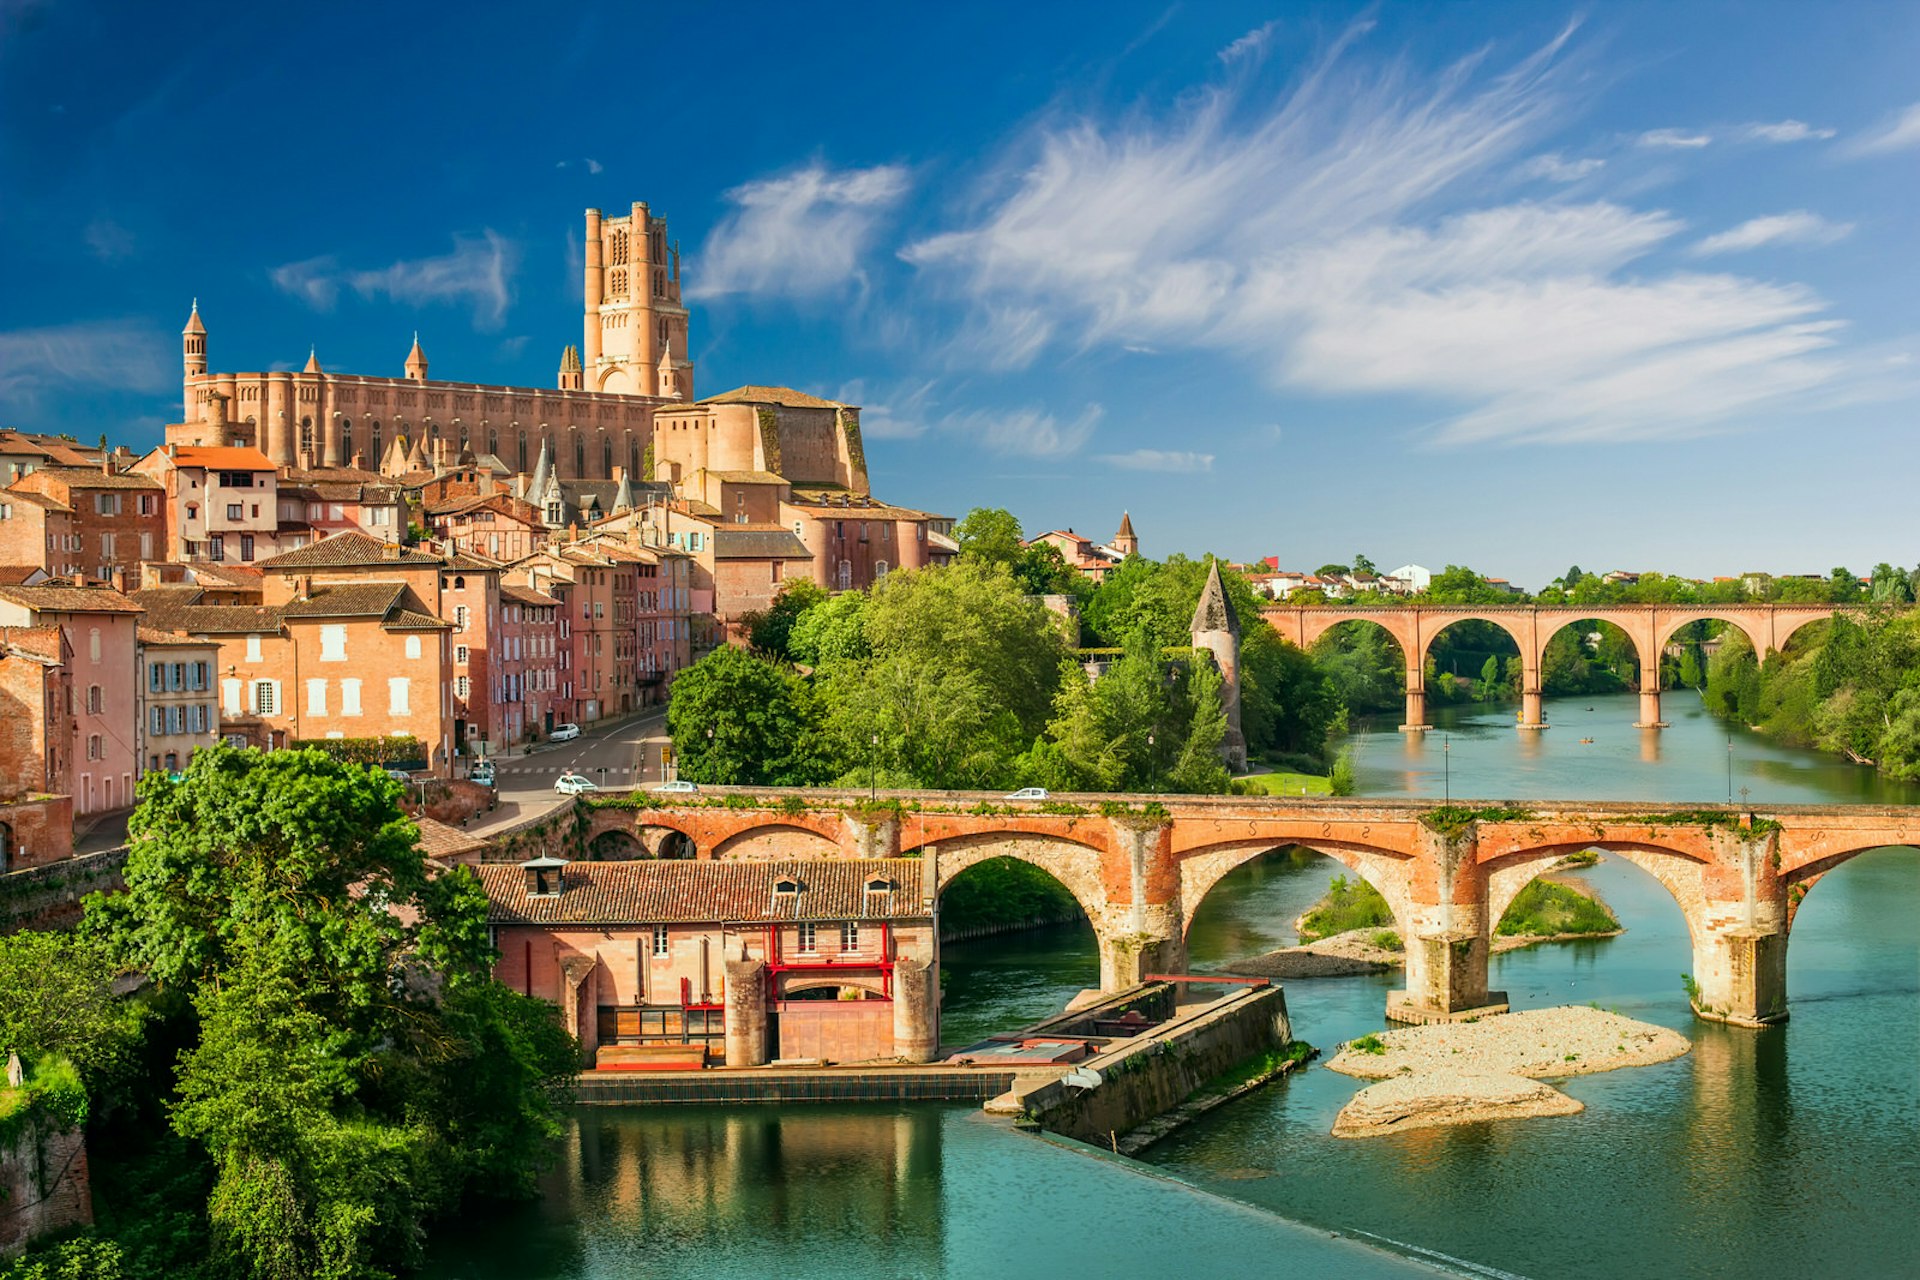 Tarn travel - The town of Albi is dominated by the enormous redbrick Cathédrale Ste-Cécile, which sits on a hill above the rest of the town and the River Tarn